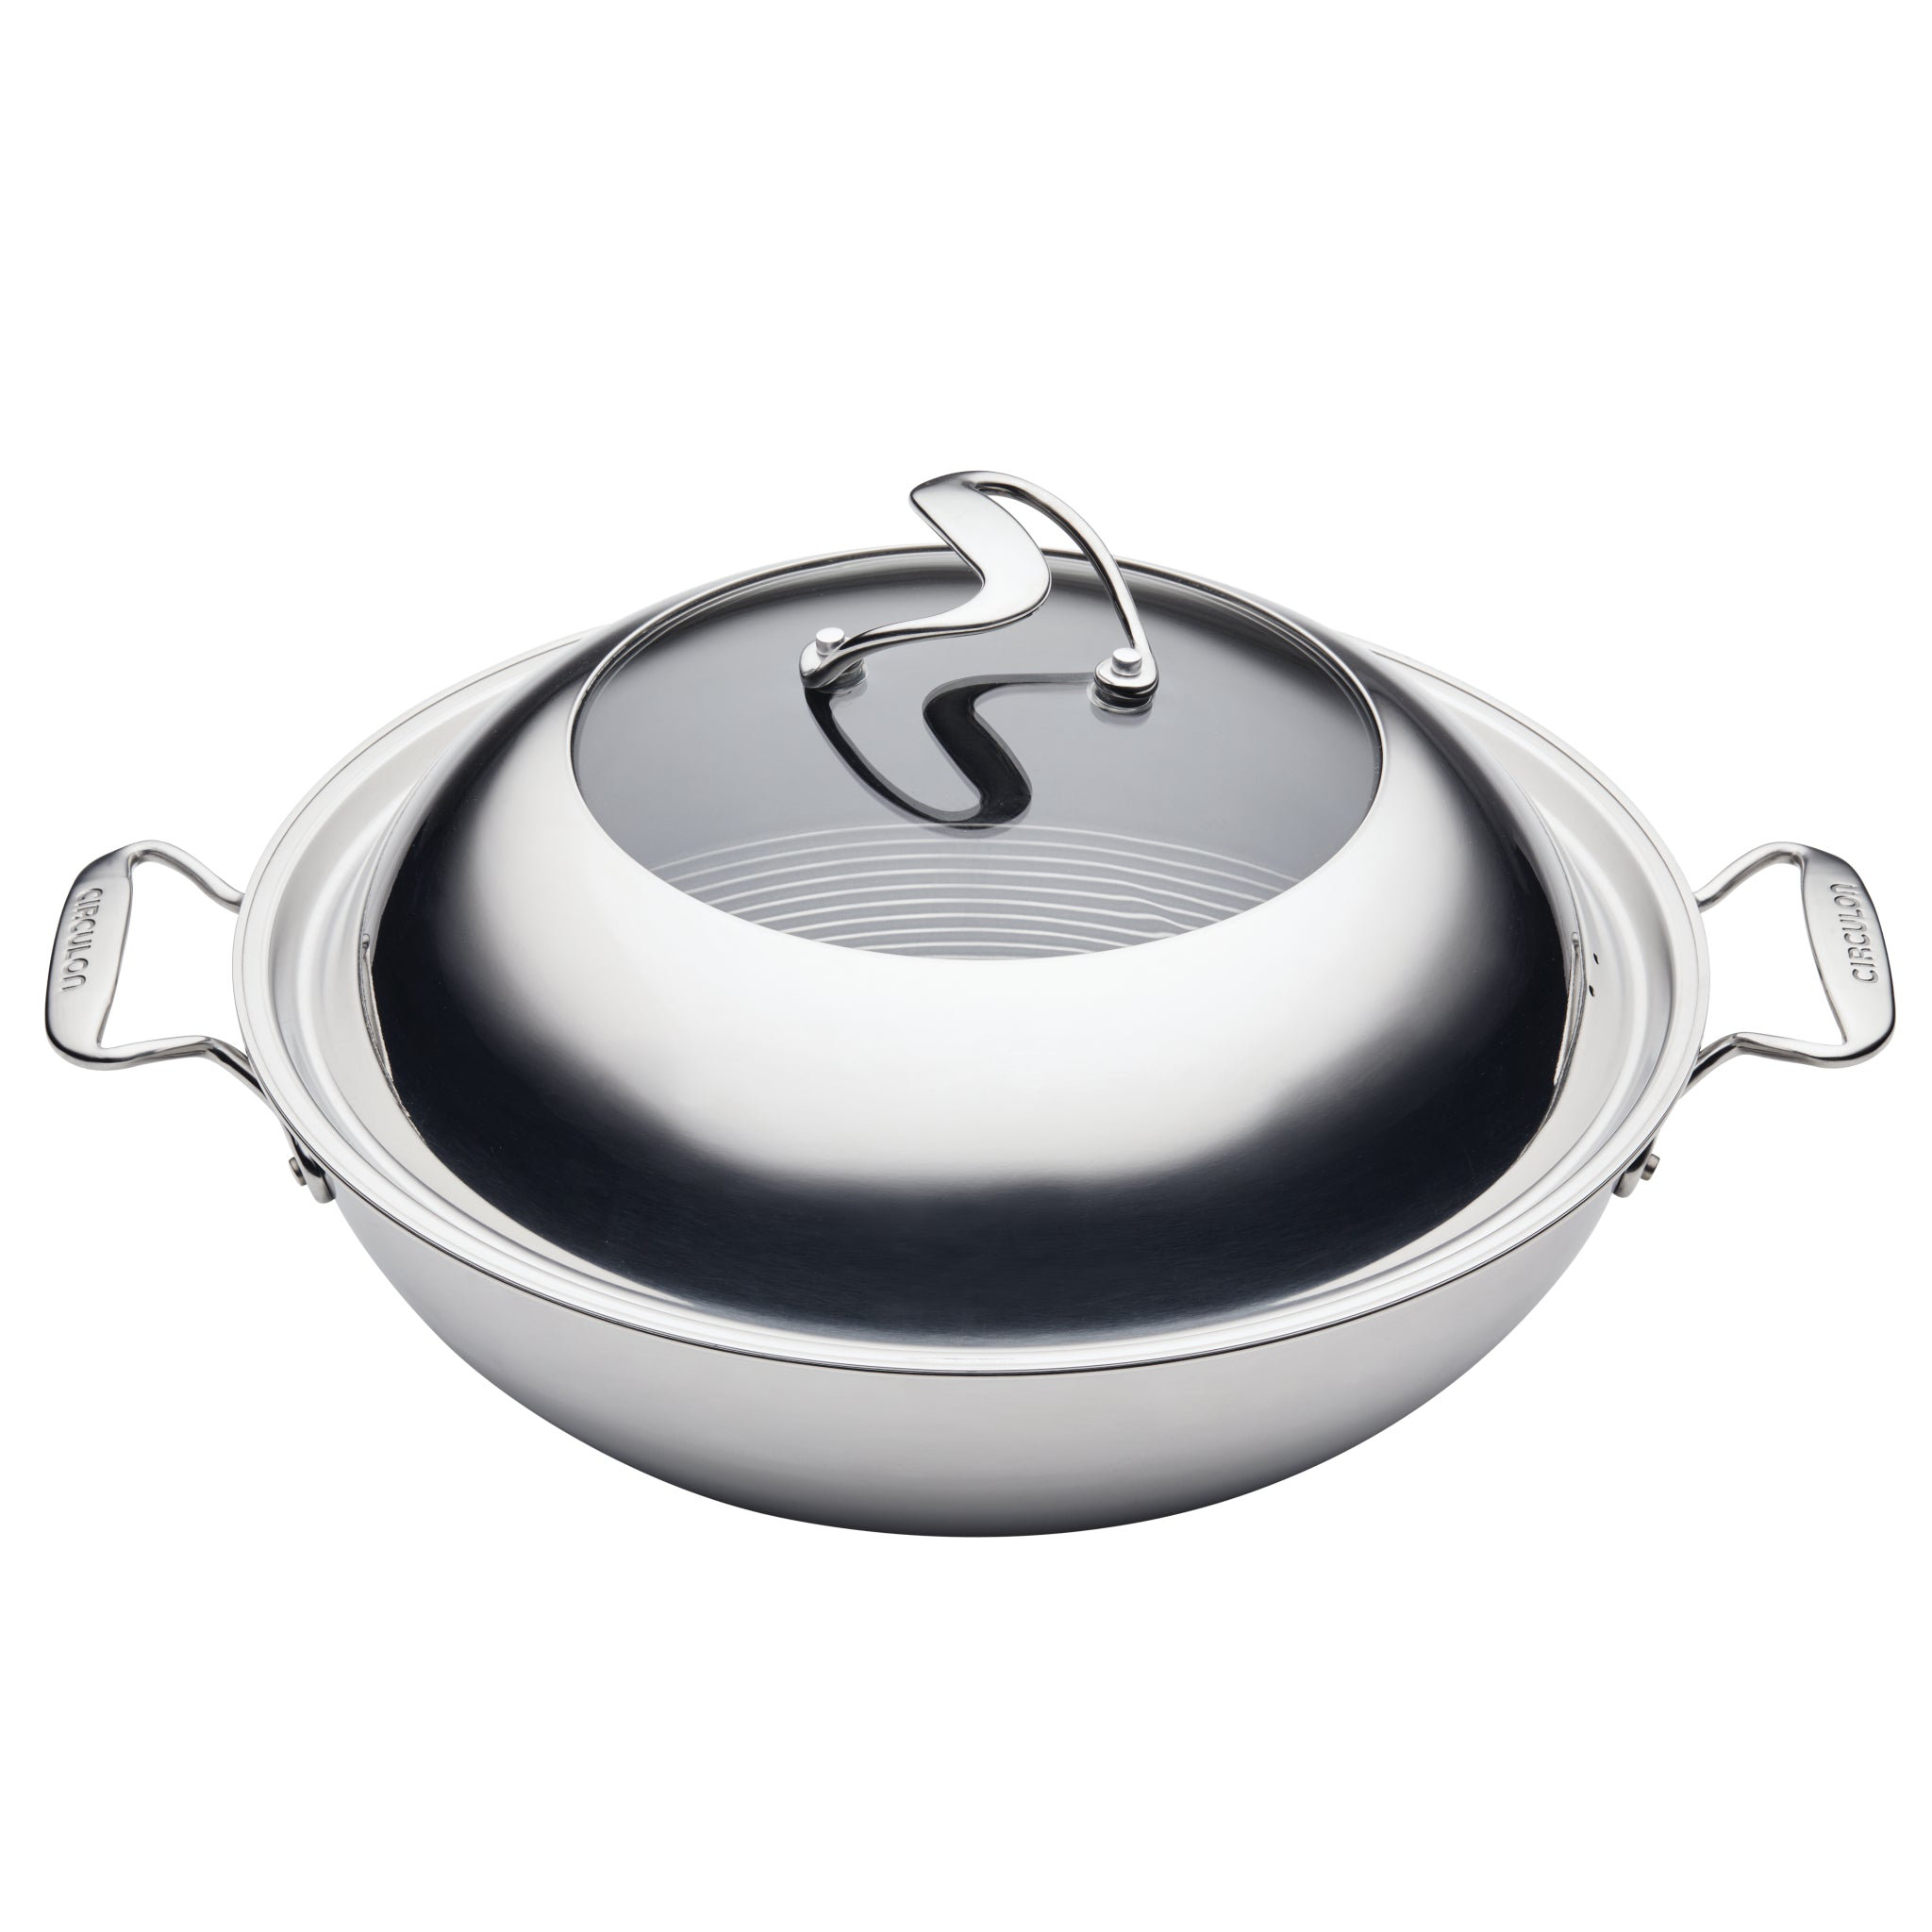 Circulon Clad Stainless Steel Wok and Hybrid SteelShield and